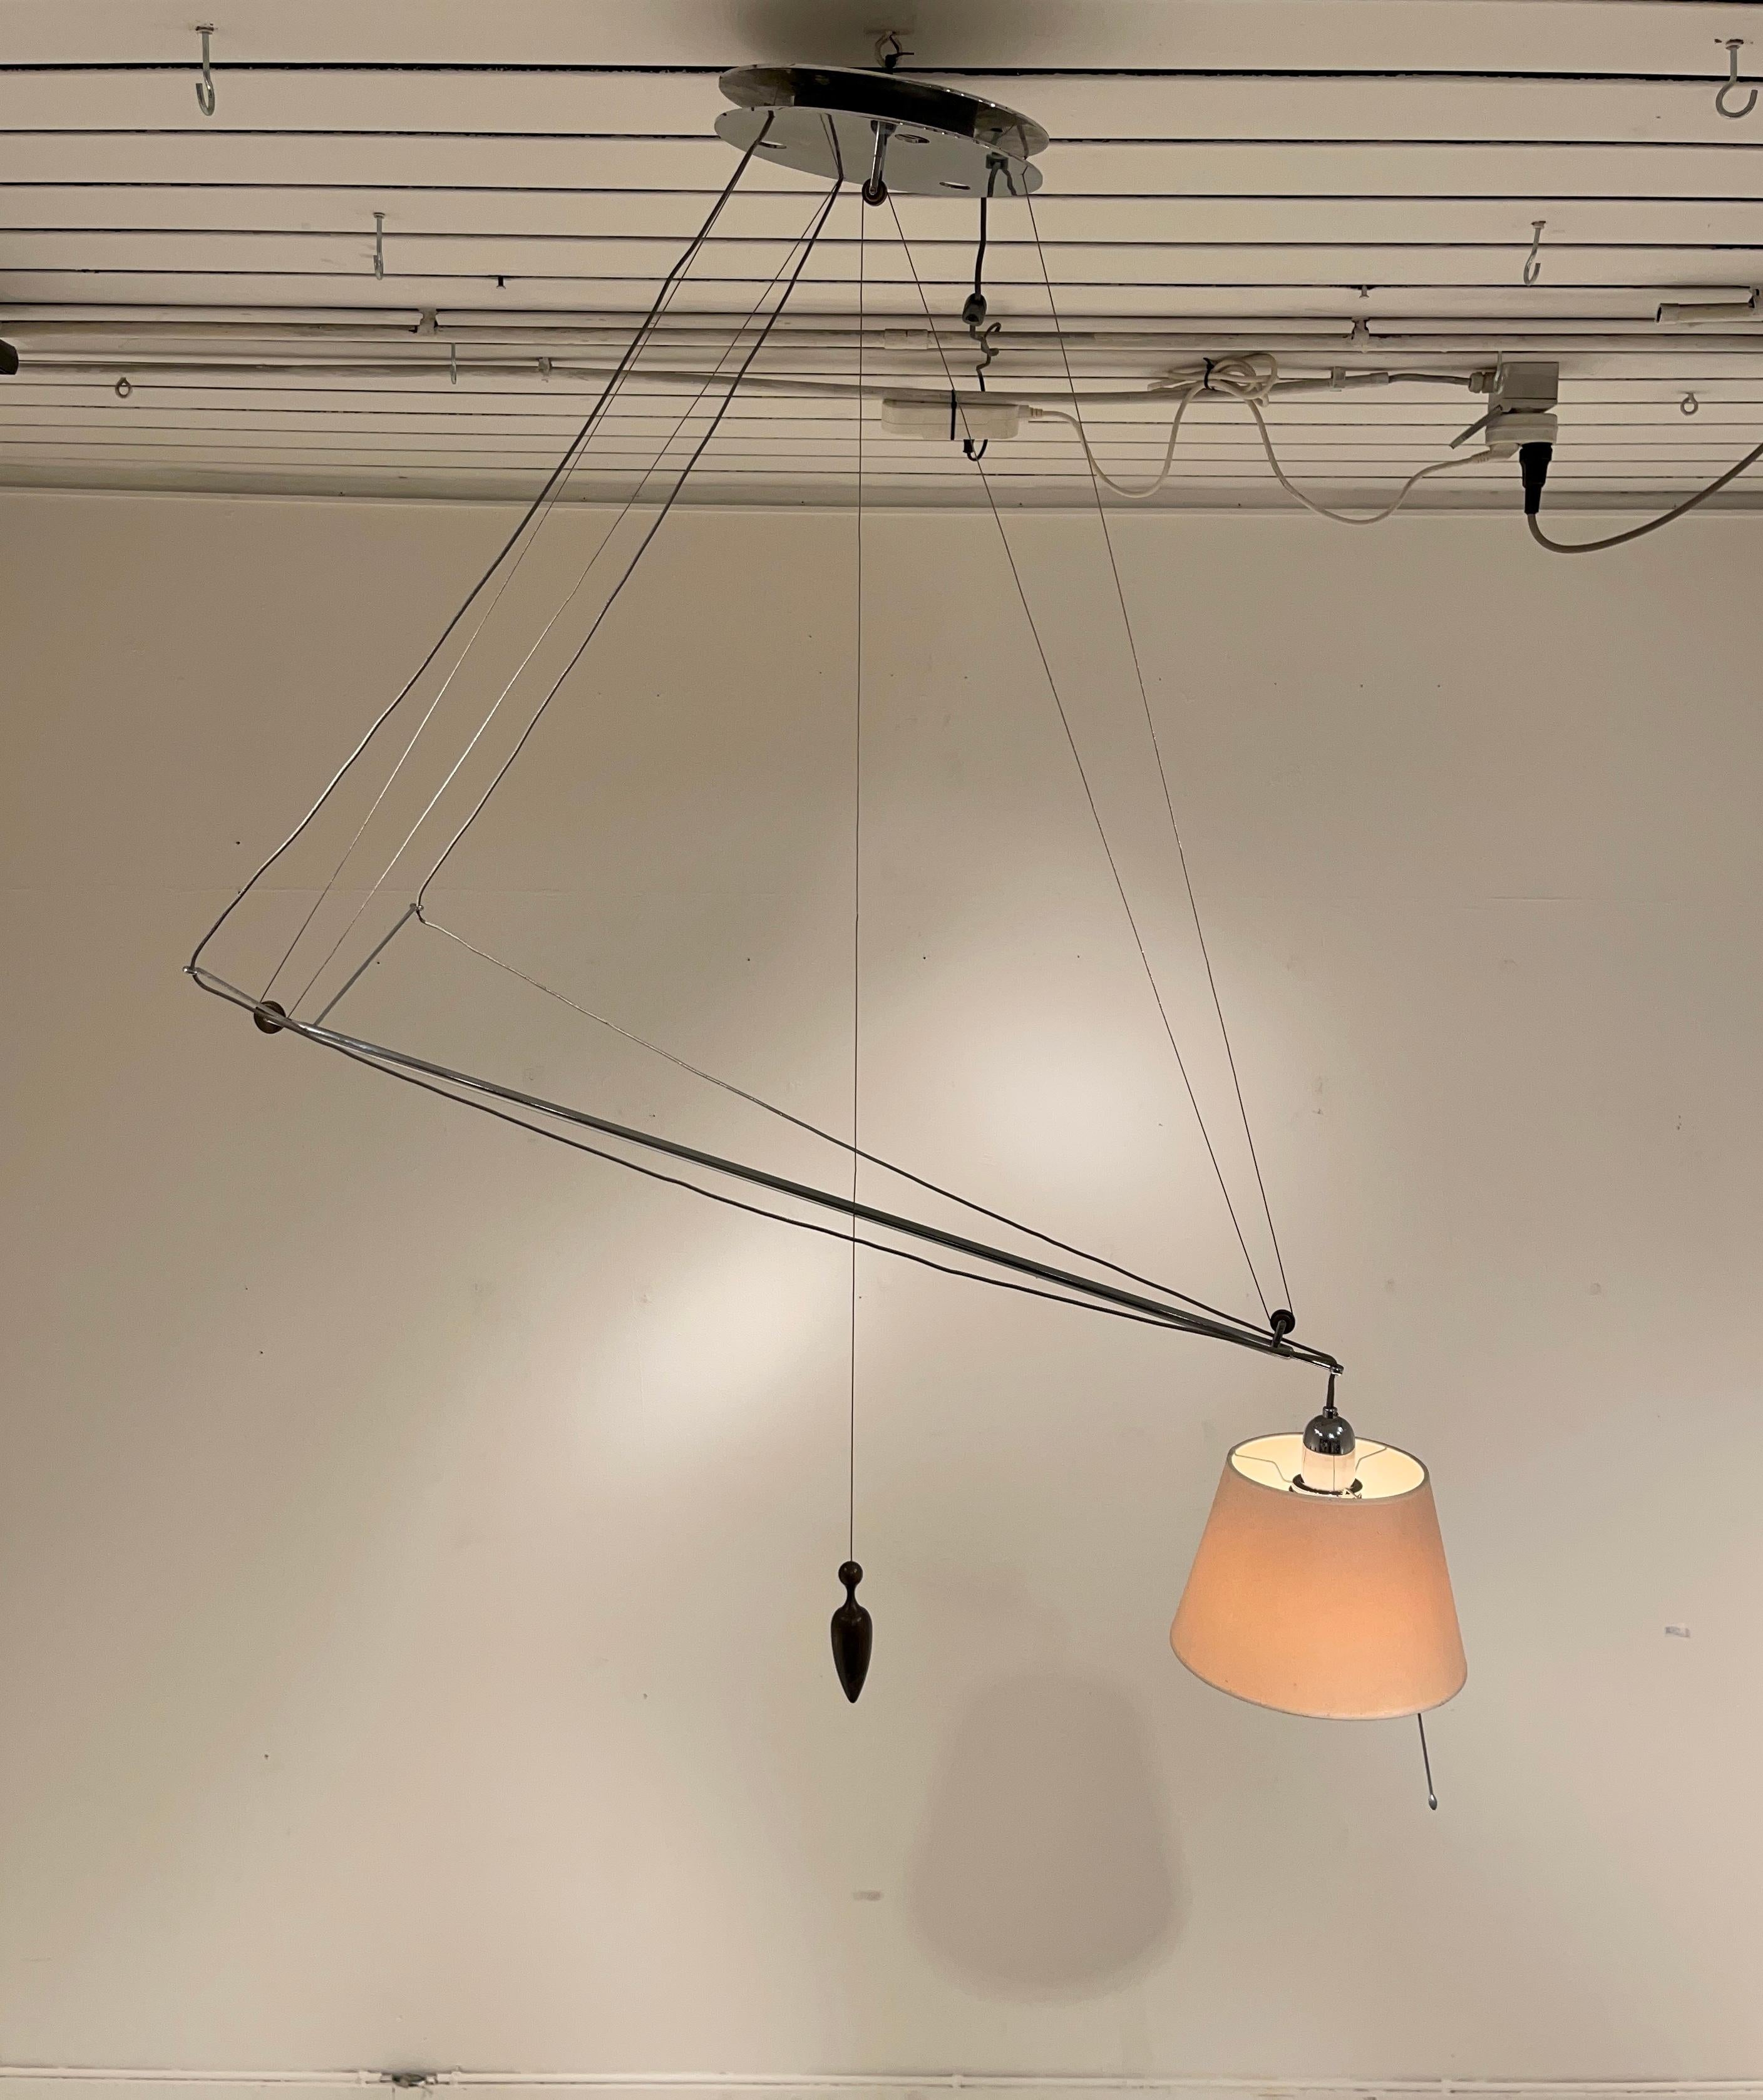 Very rare lamp by Michele De Lucchi....
MACCHINA MINIMA N°7
Minimal Machine n°7
The Minimal Machine n. 7 is a lamp that can be swiveled up and down. The combination of the two movements of the arm favors more positions and gives the lamp a